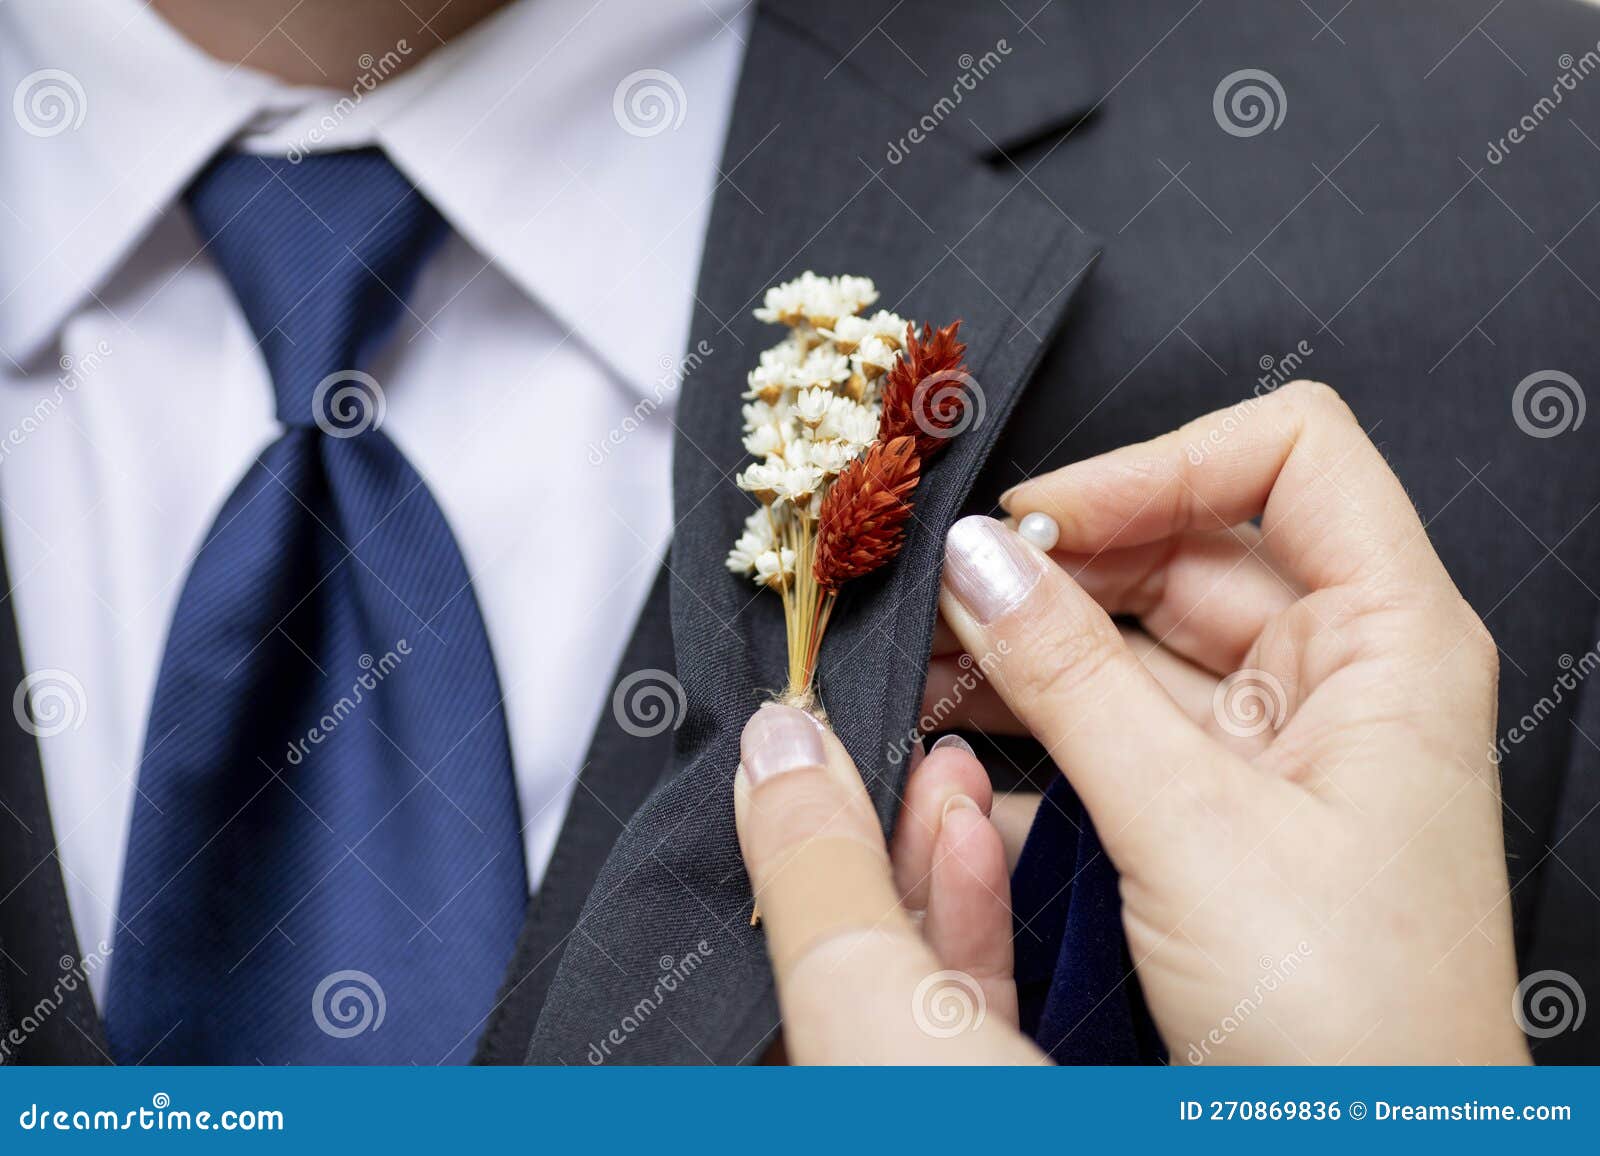 detail shot of hands pinning on a boutonnniere on a grooms suit